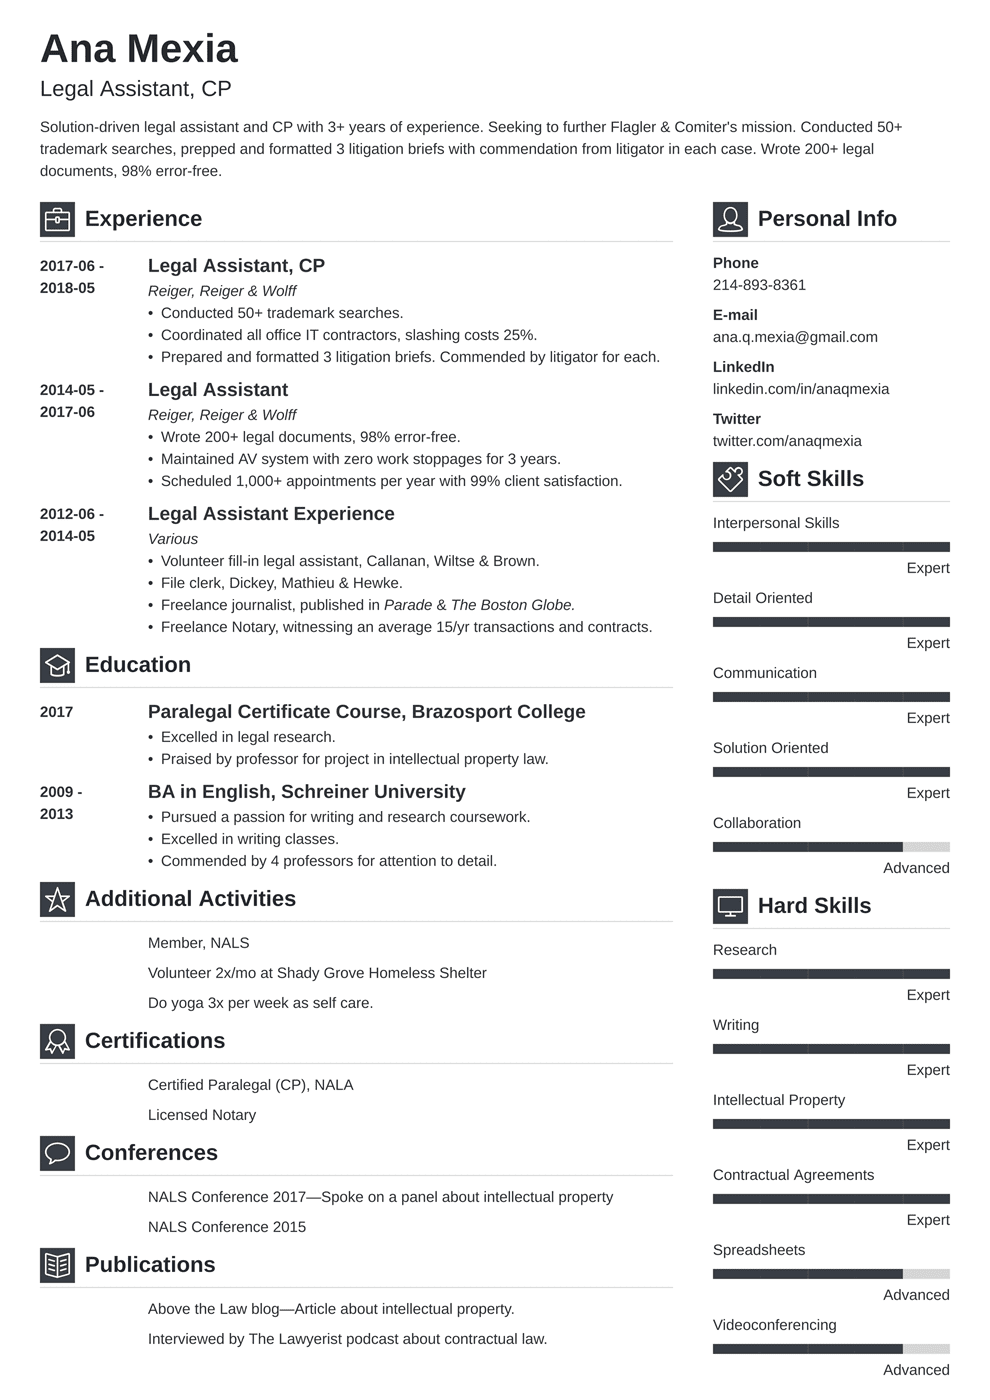 Legal Assistant Resume Examples - BEST RESUME EXAMPLES